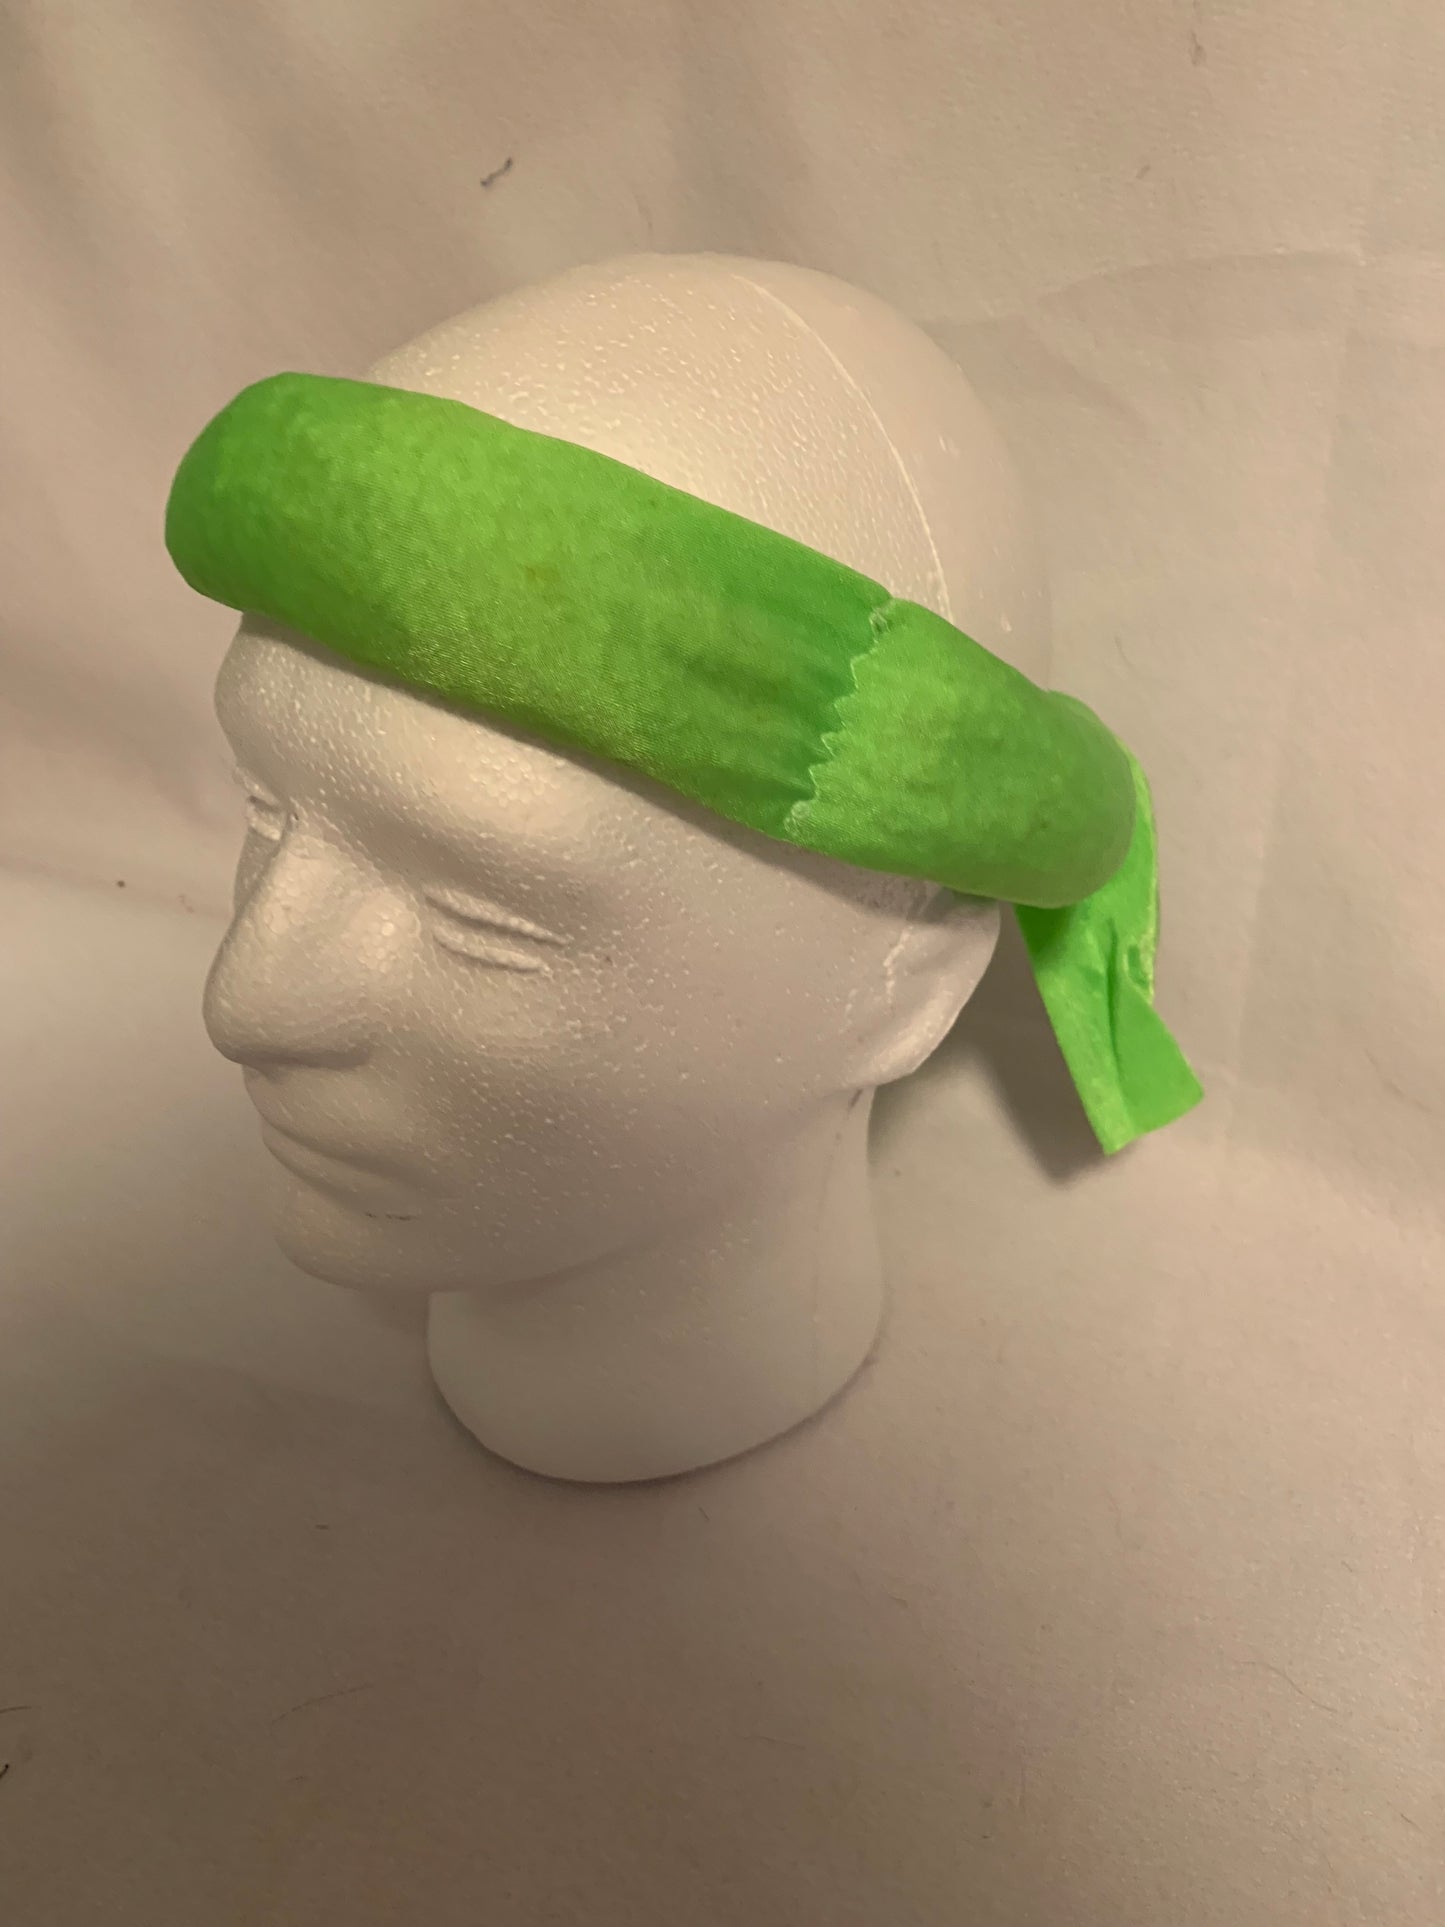 Weighted headband for compression and weight around rim of head, adult, various colors, stretchy spandex, weighted scarf, weighted hat